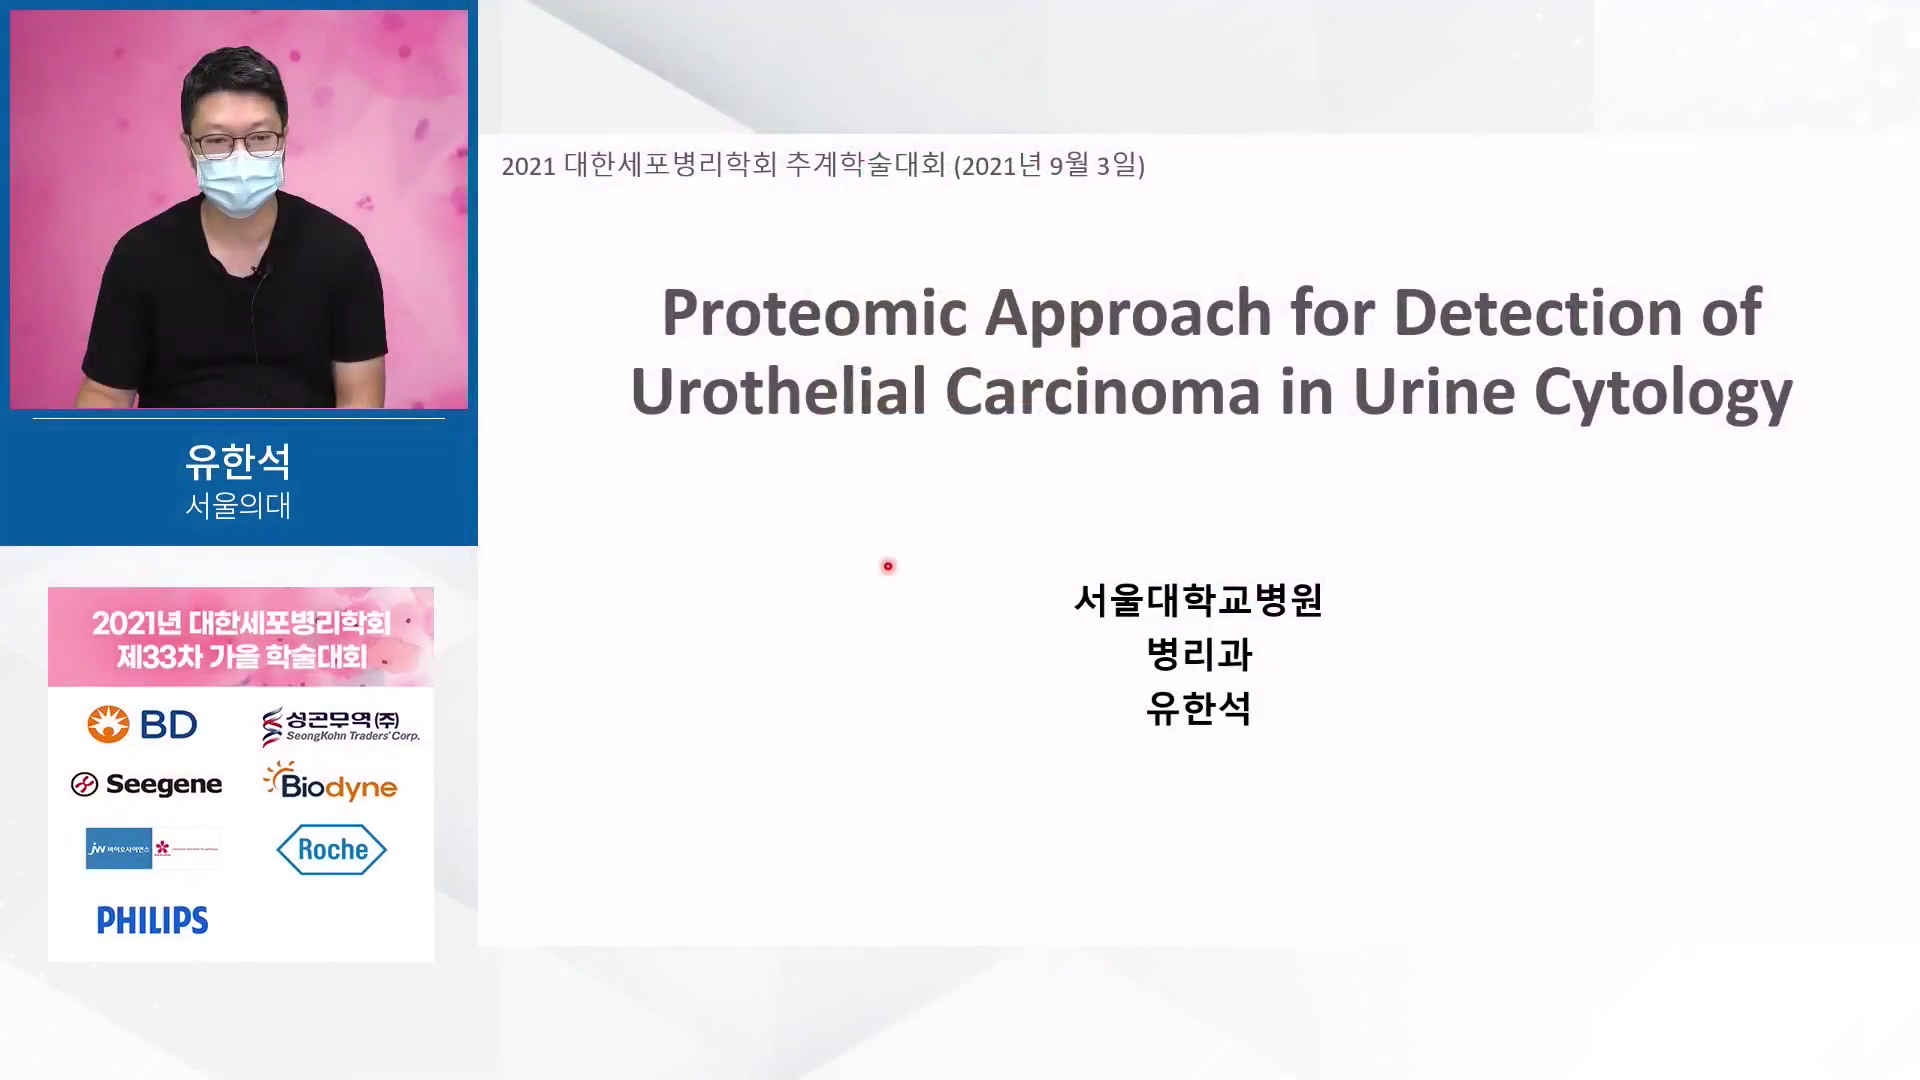 Proteomic Approach for Detection of Urothelial Carcinoma in Urine Cytology